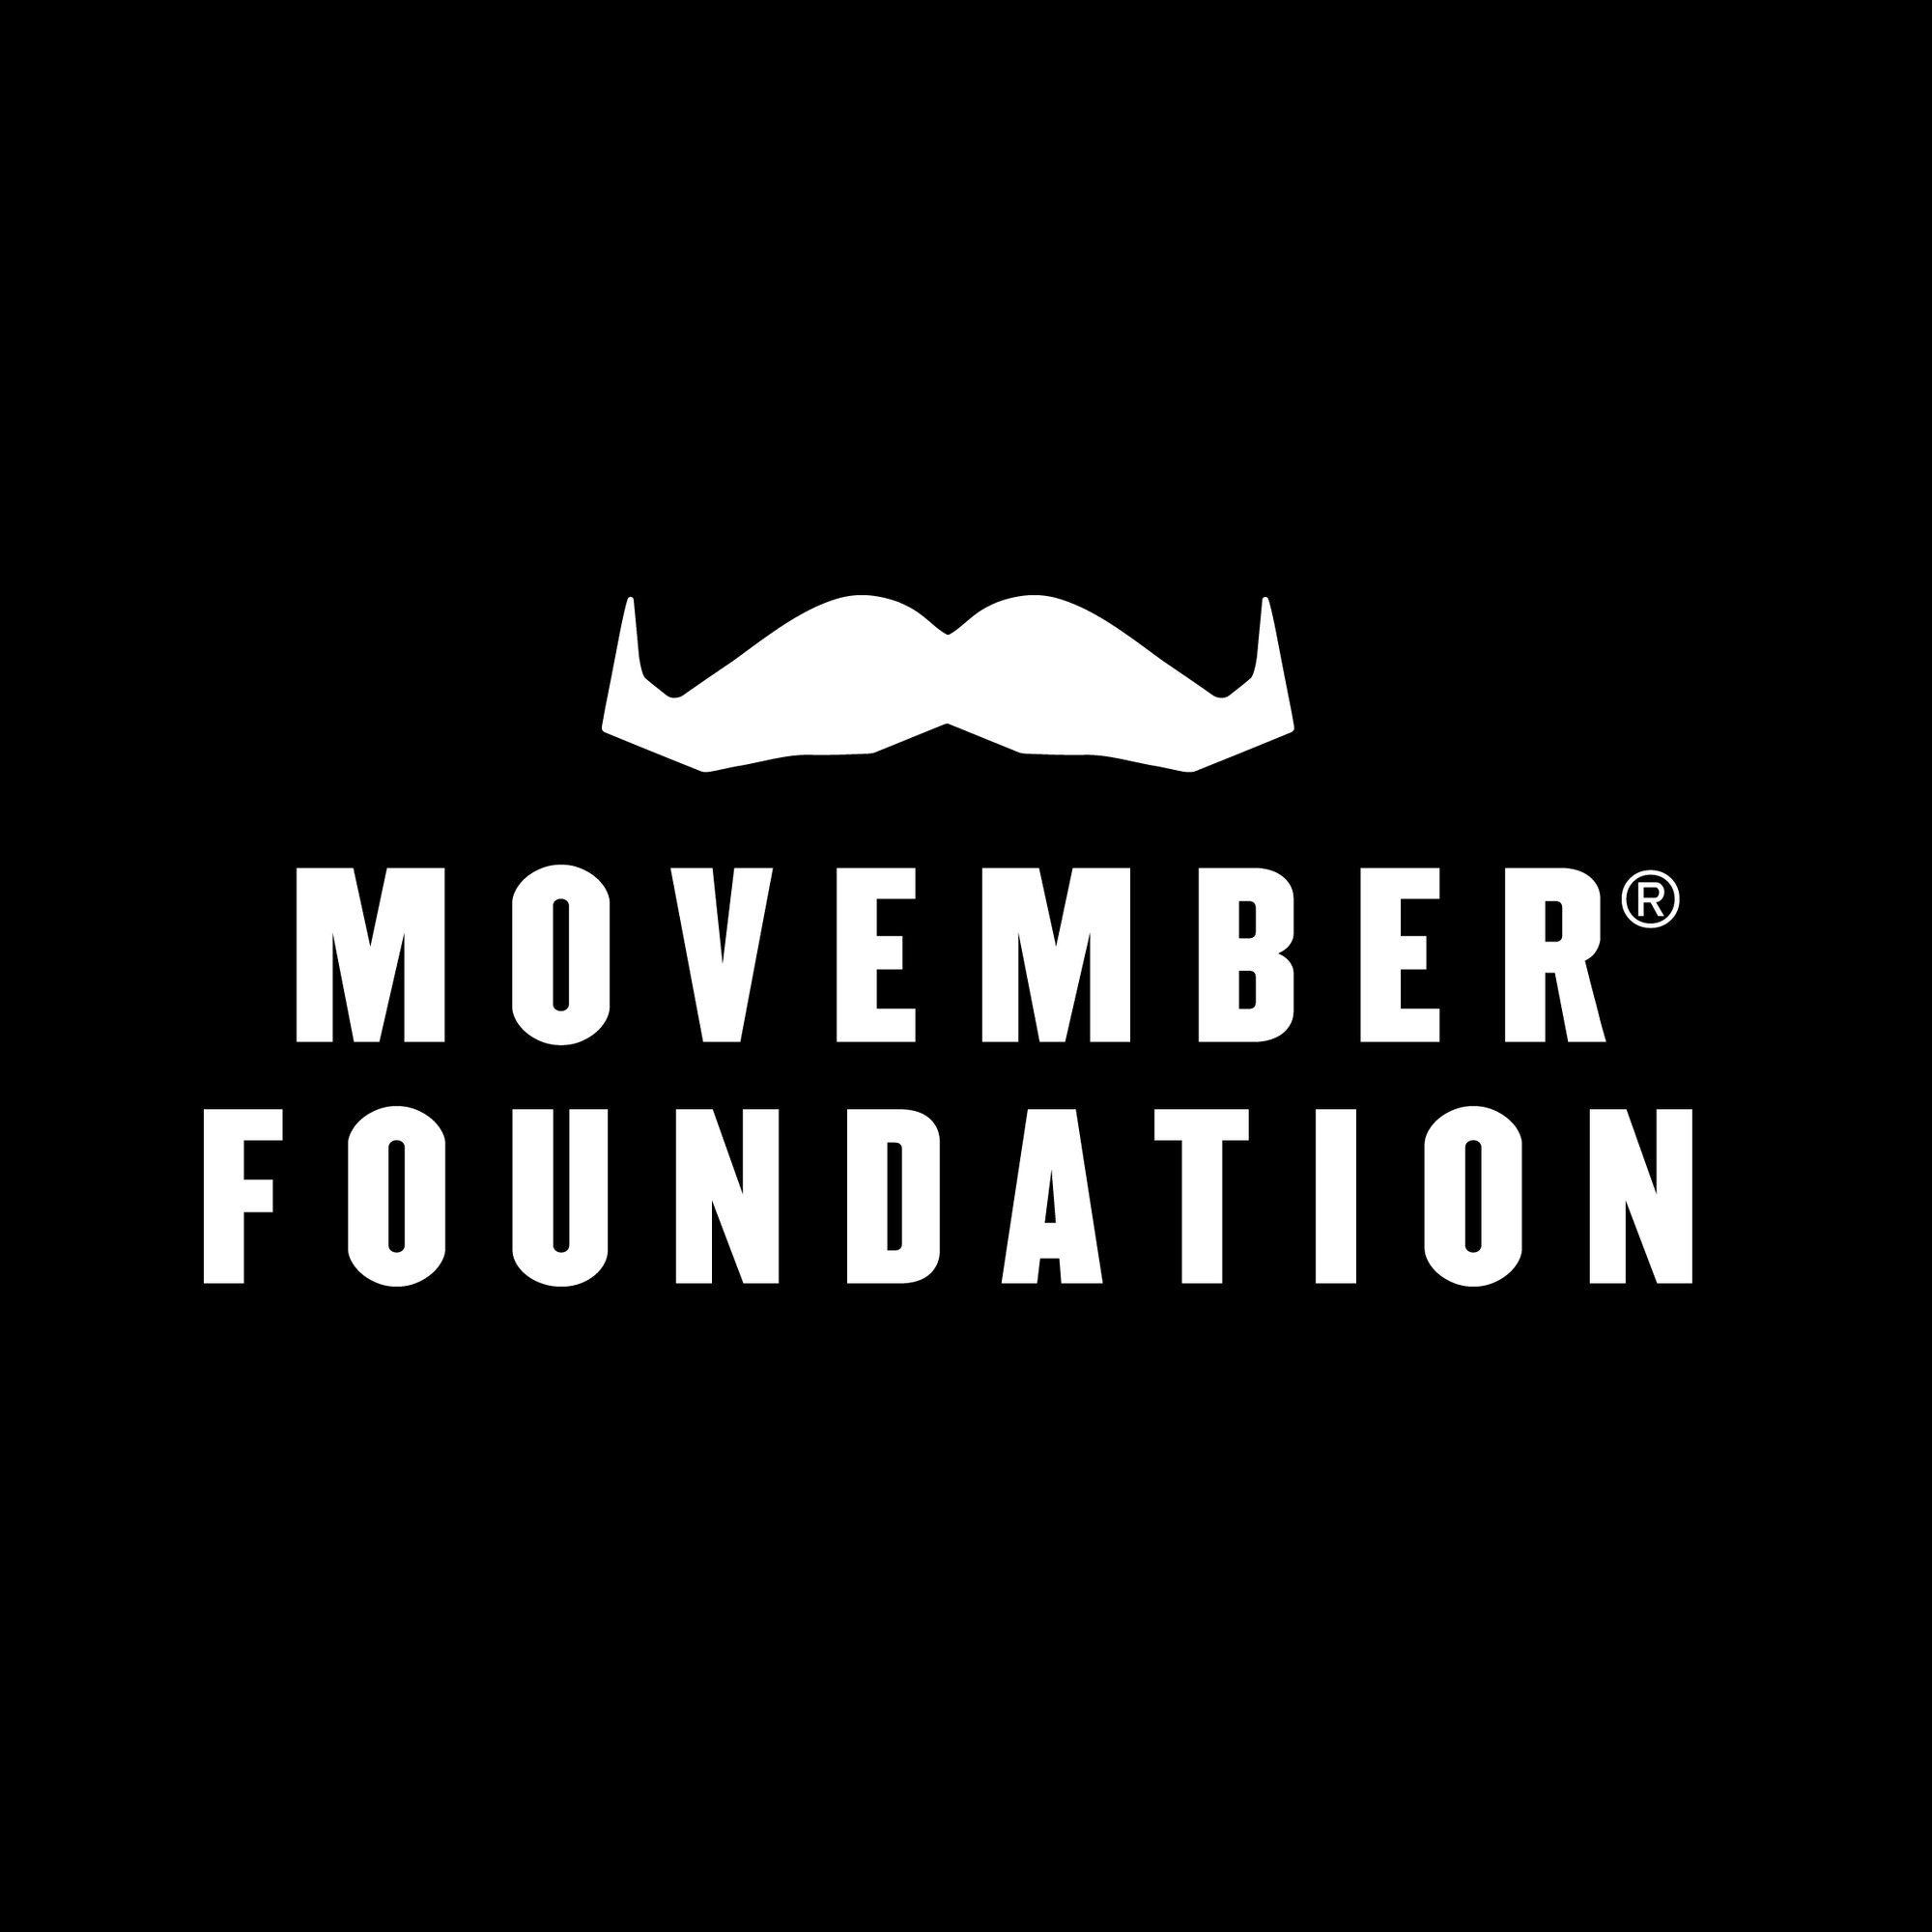 Imperial Personnel gents to take Part in Movember campaign